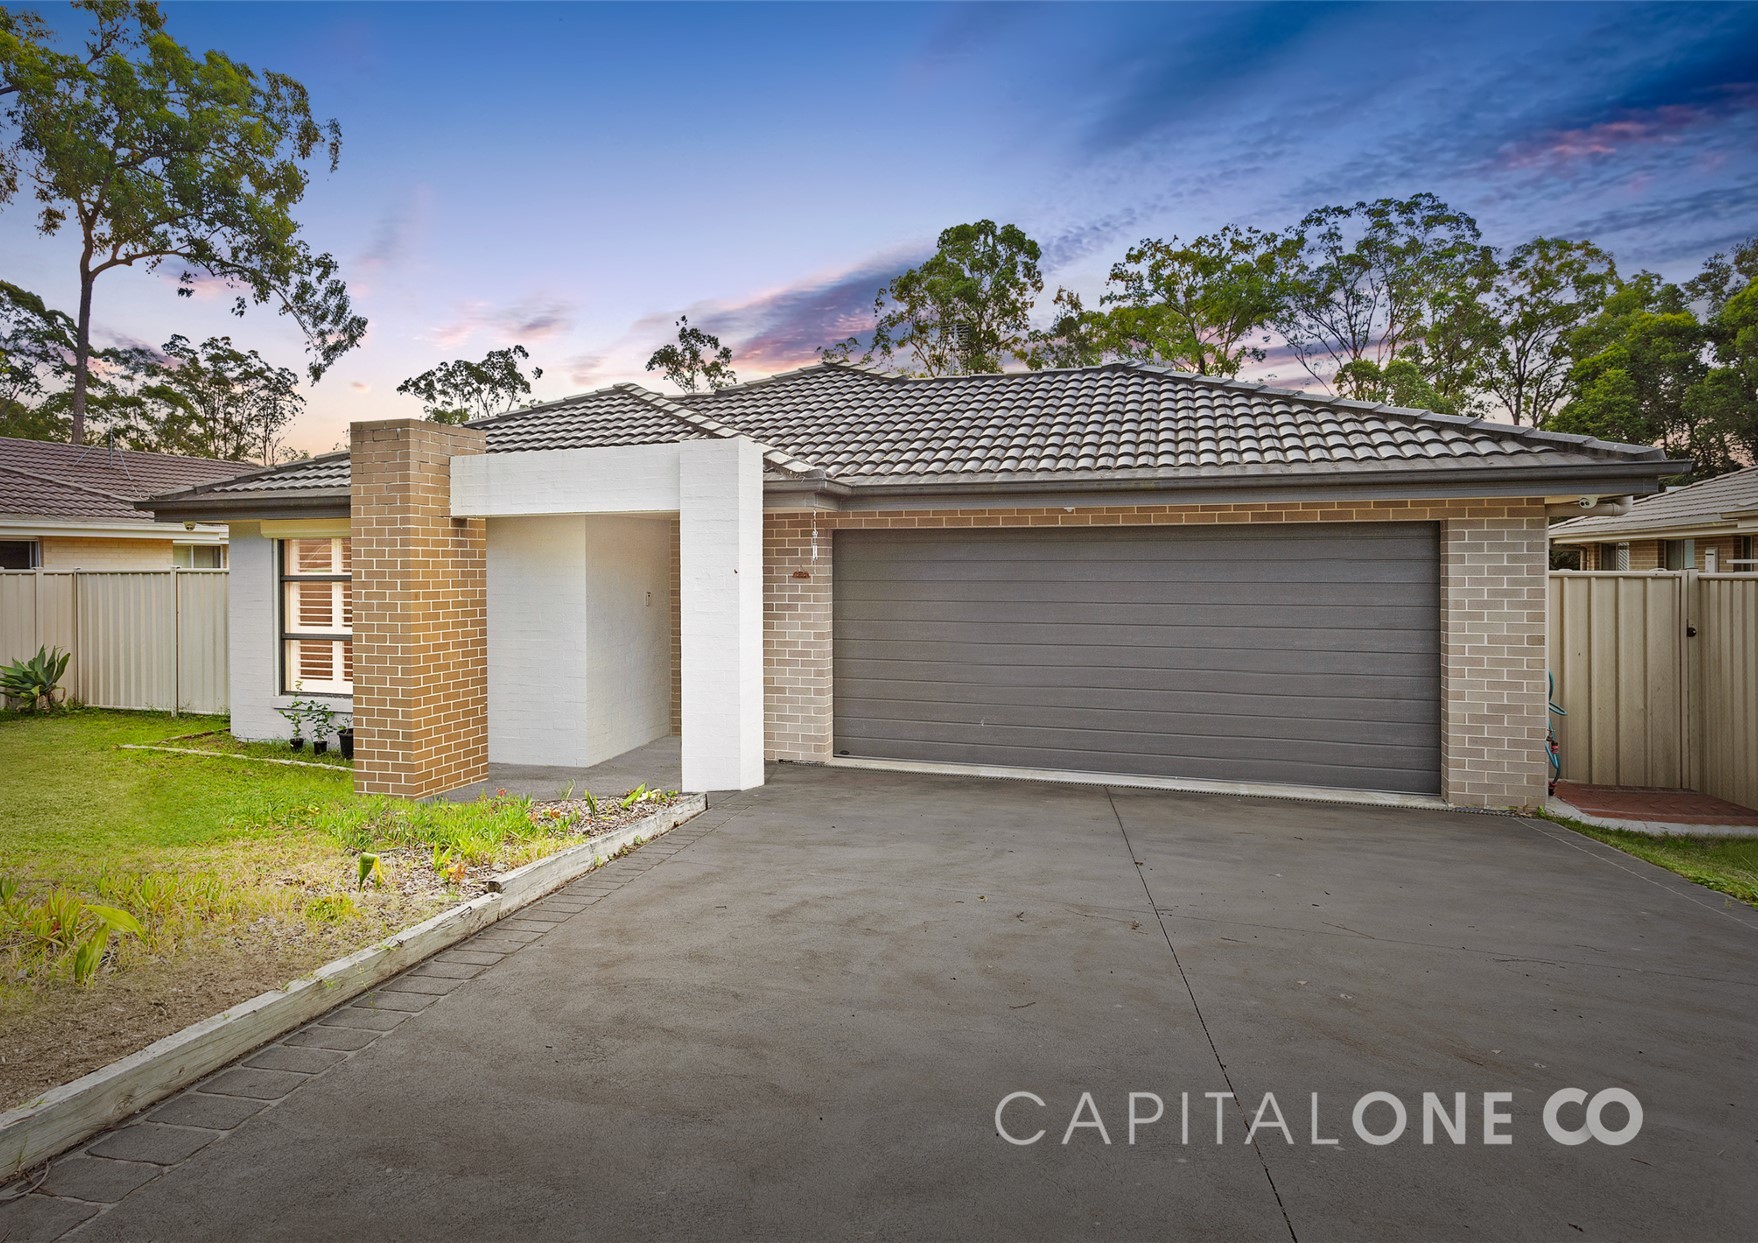 Property Sold in Wyong